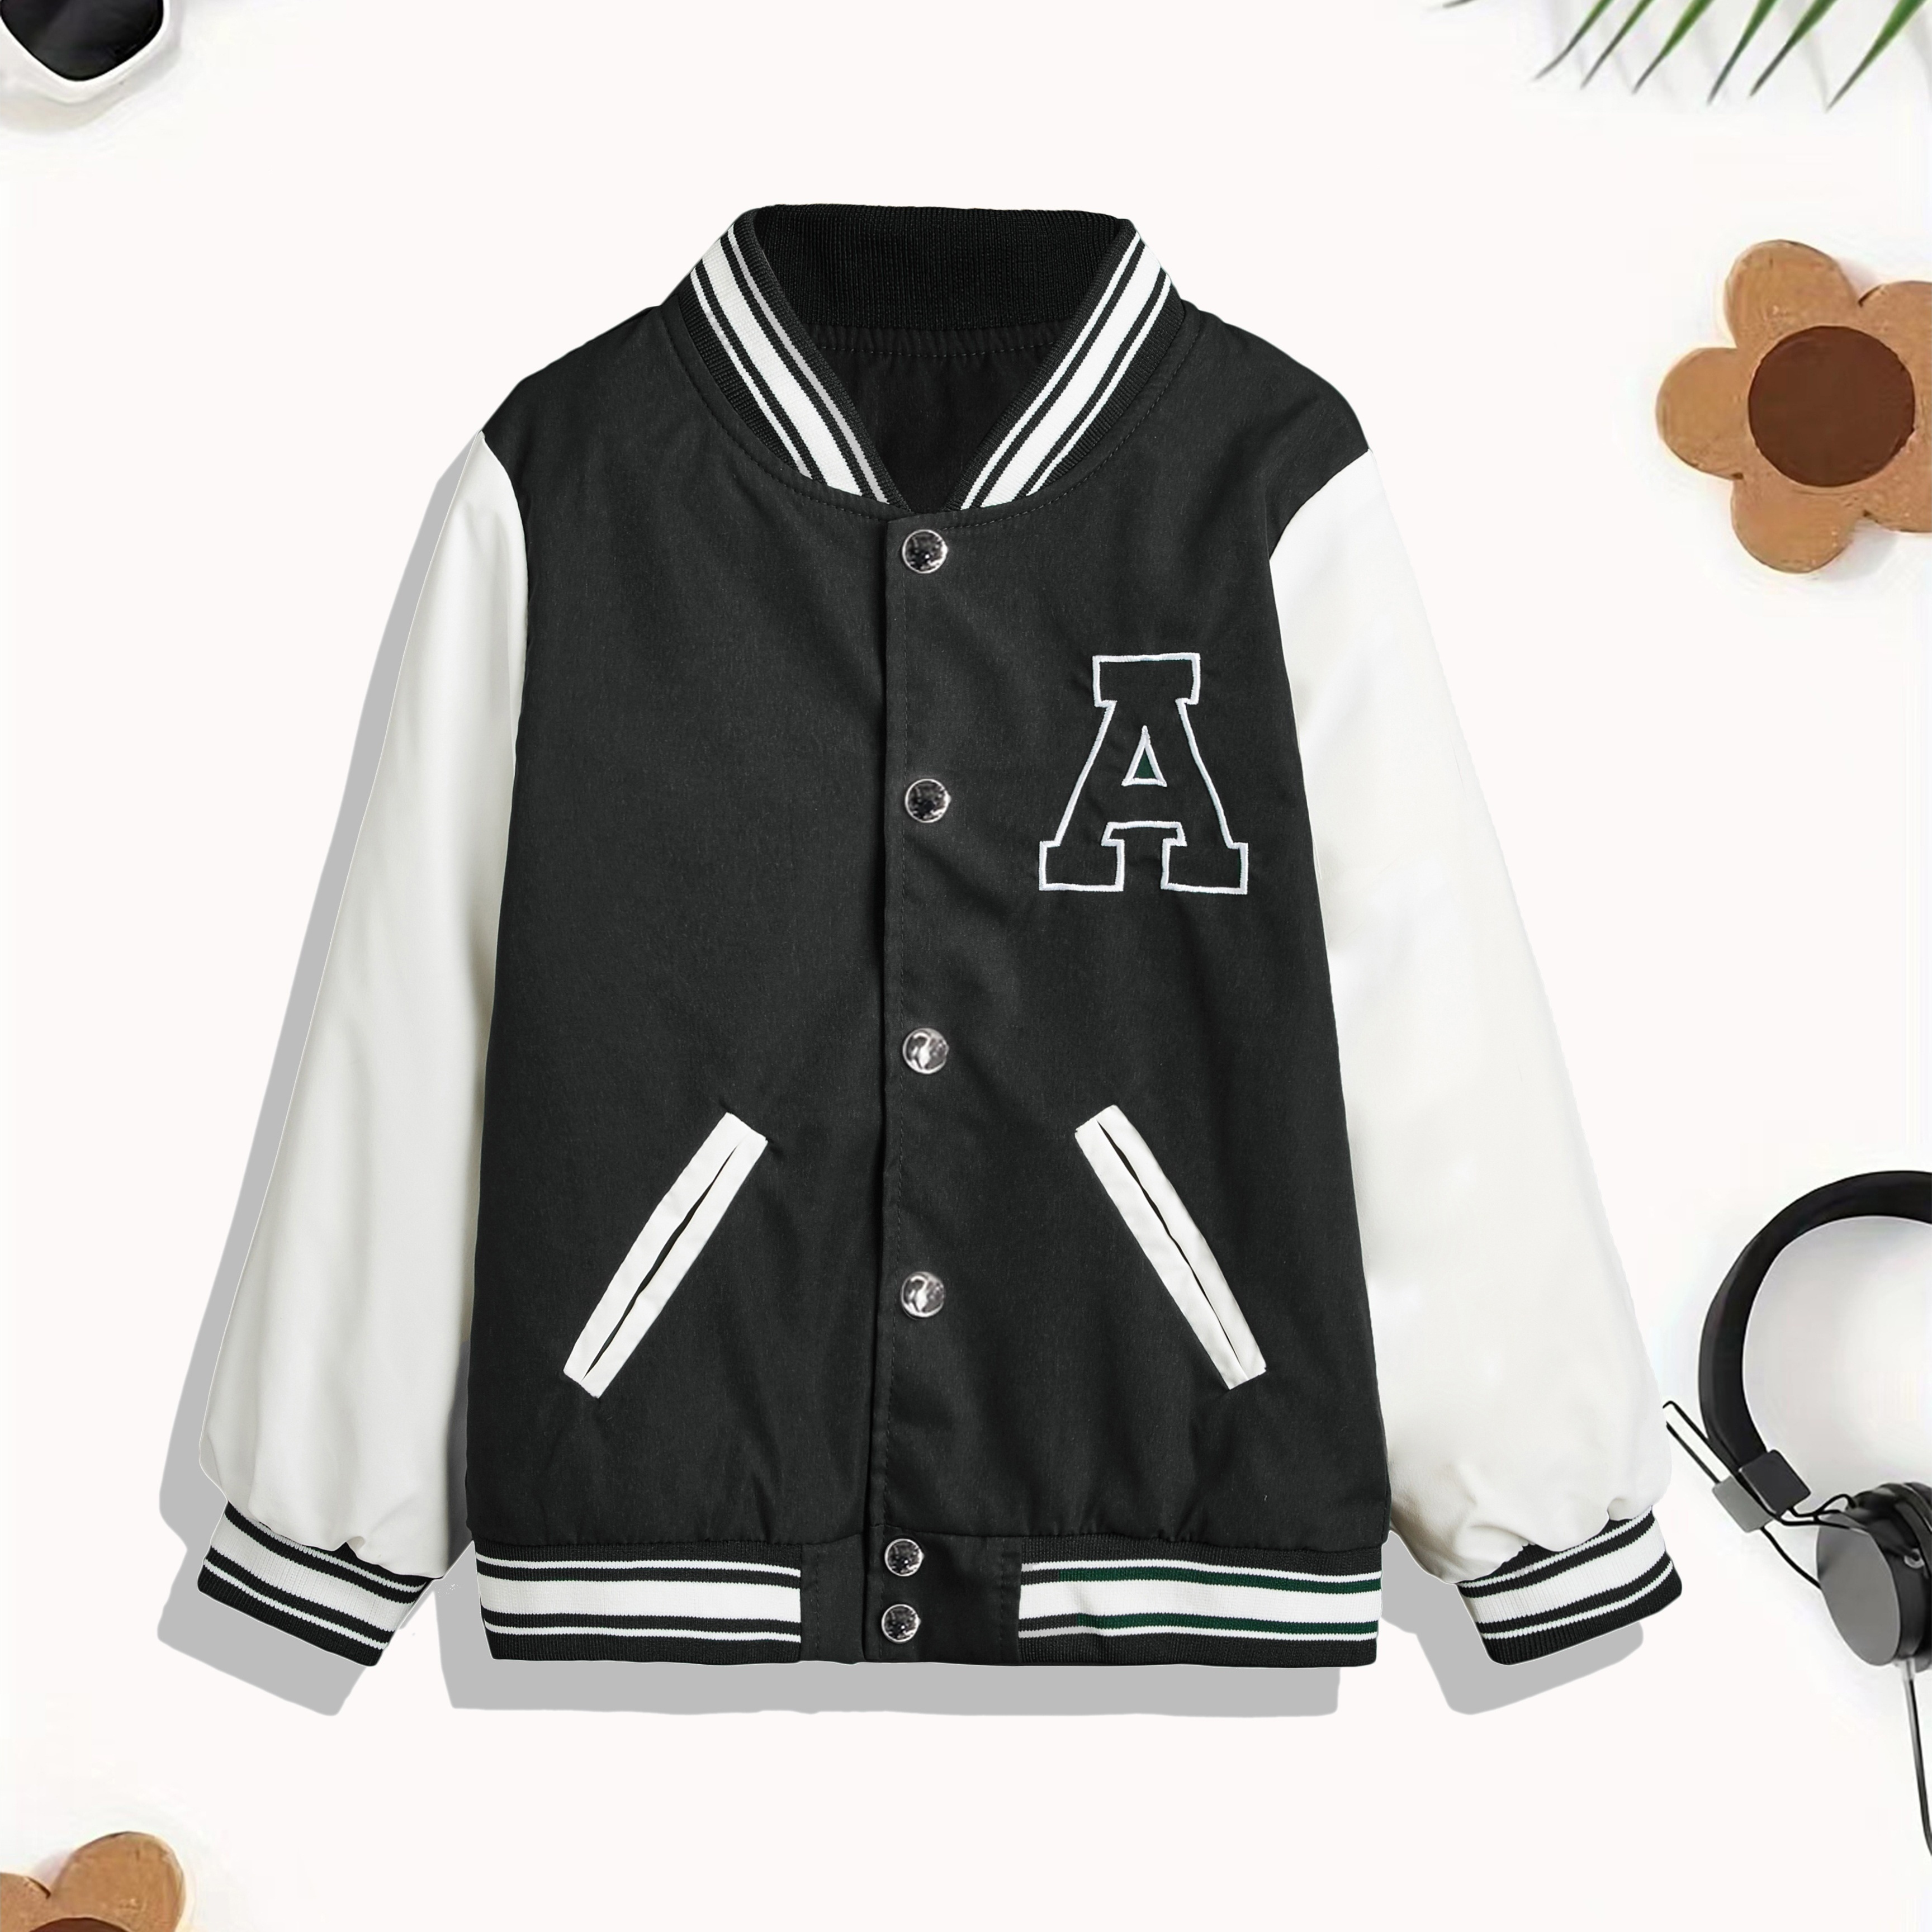 

Unisex Kid's Colorblock Varsity Jacket With Zip Pockets For Boys And Girls Casual Baseball Uniform Autumn And Winter Clothes